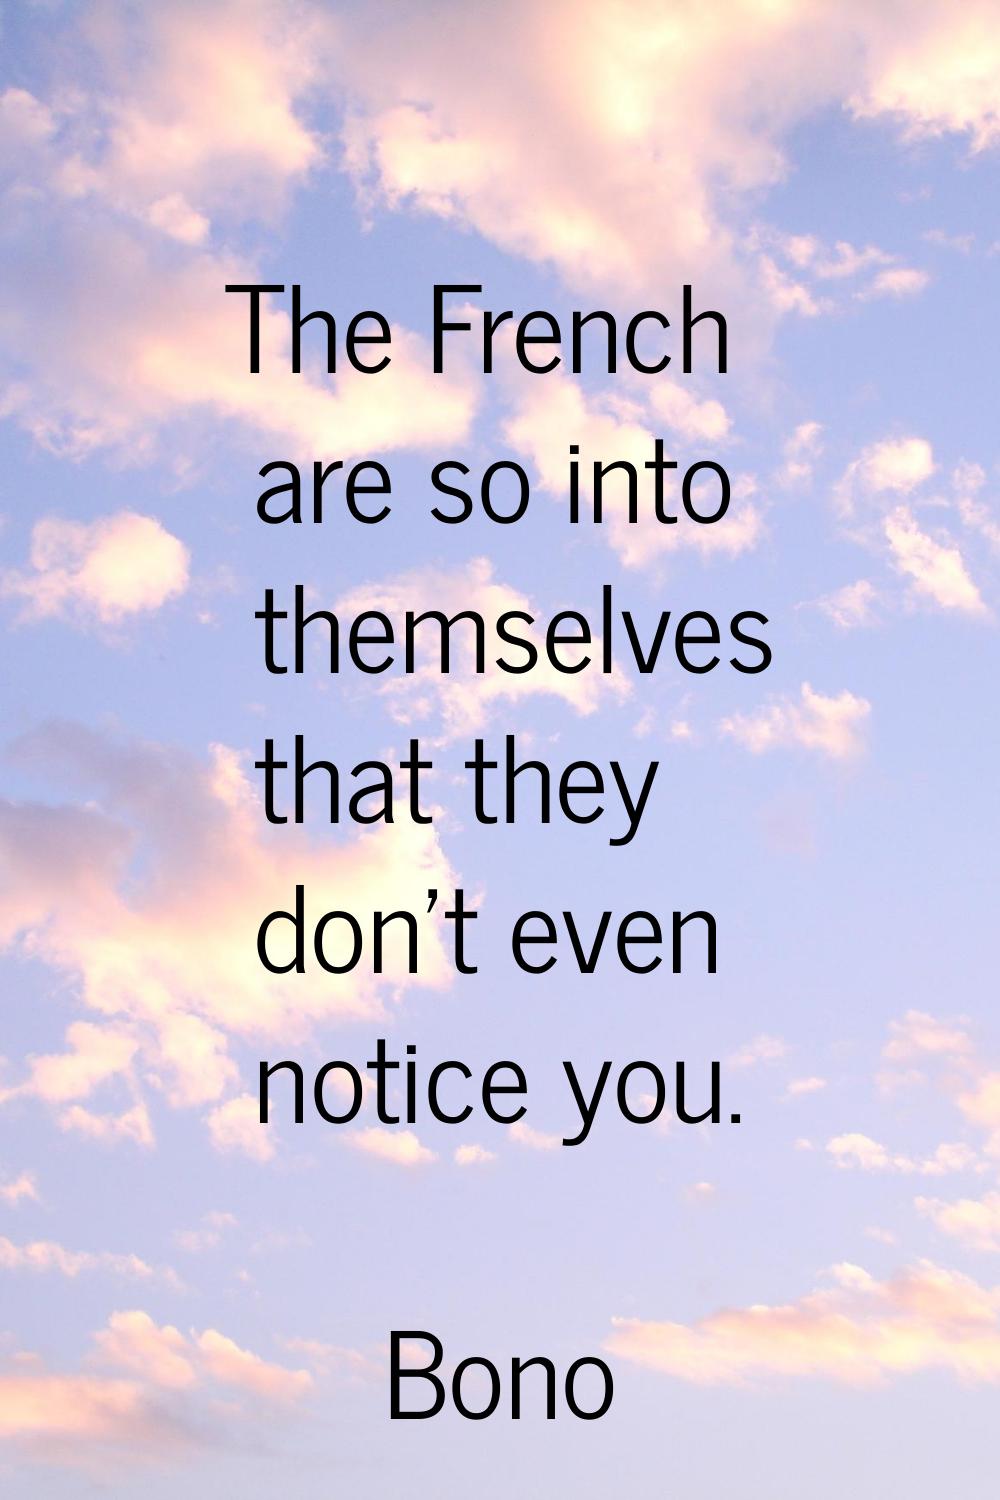 The French are so into themselves that they don't even notice you.